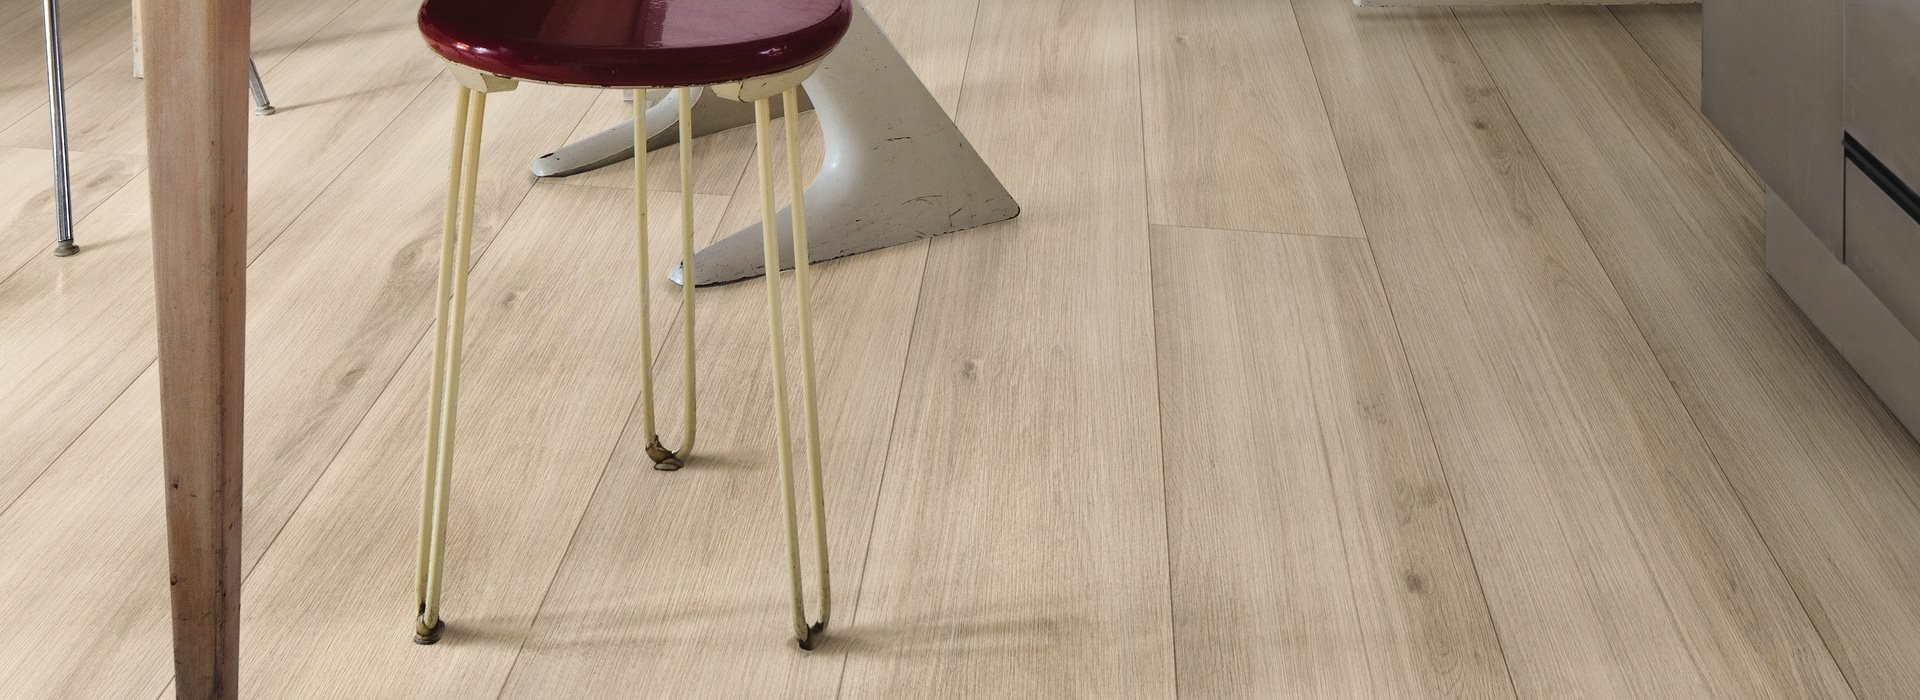 DISANO by HARO ClassicAqua Plank 1-Strip XL 4V Crystal Oak* brushed Top Connect